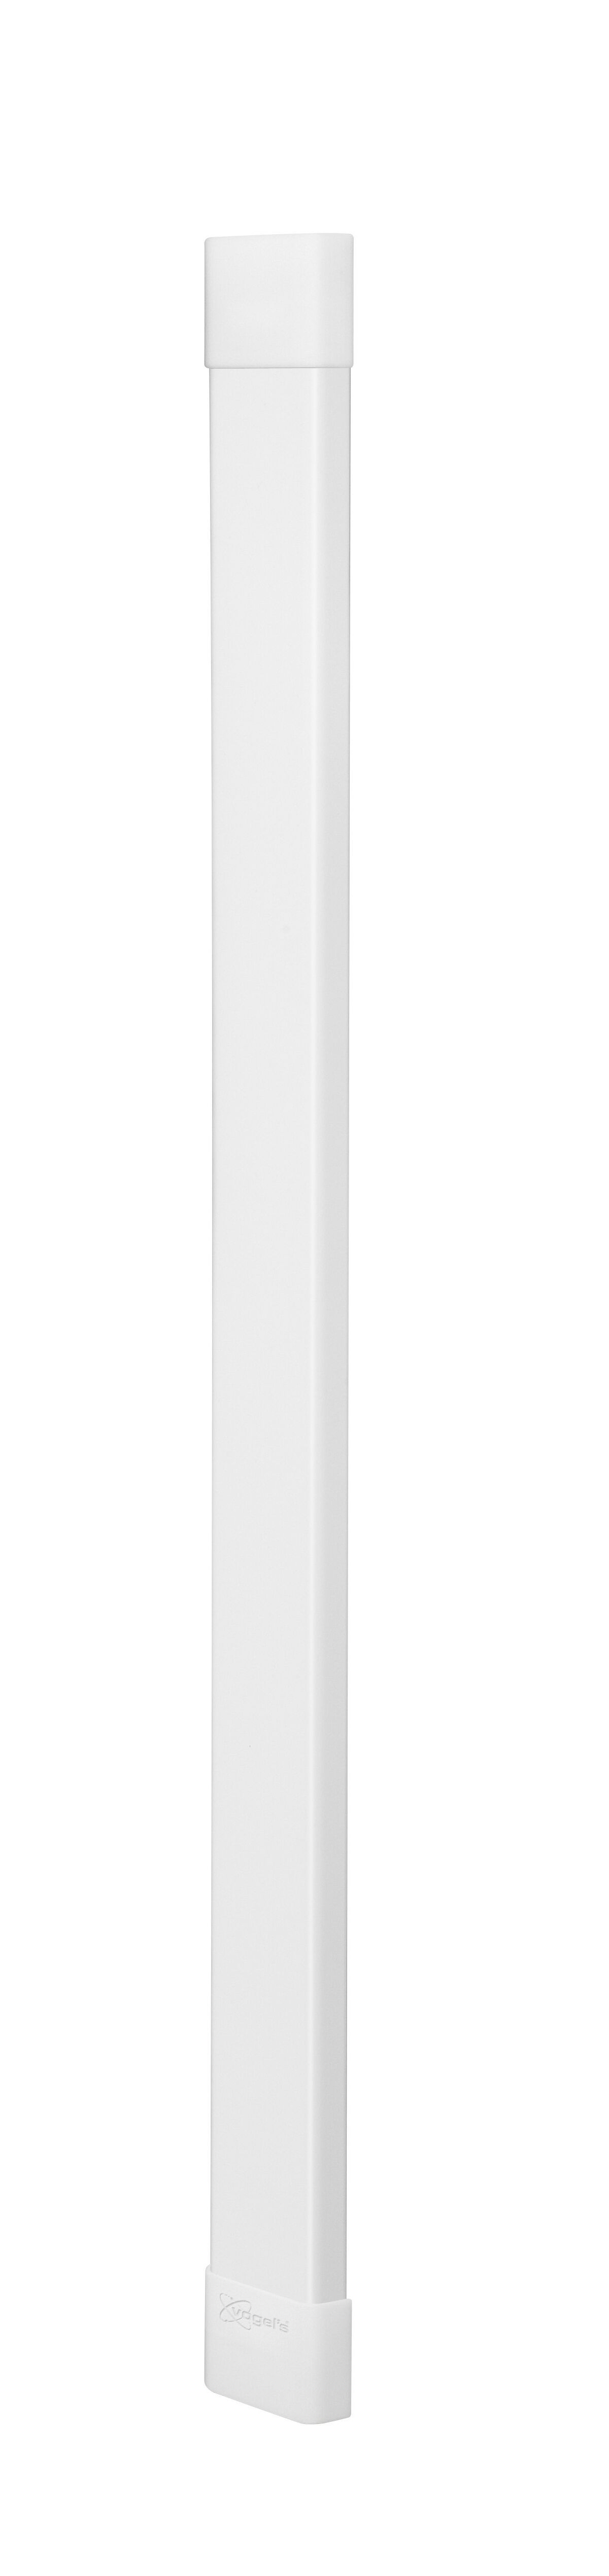 Vogel's CABLE 8 Cable Cover (white) - Max. number of cables to hold: Up to 8 cables - Length: Product